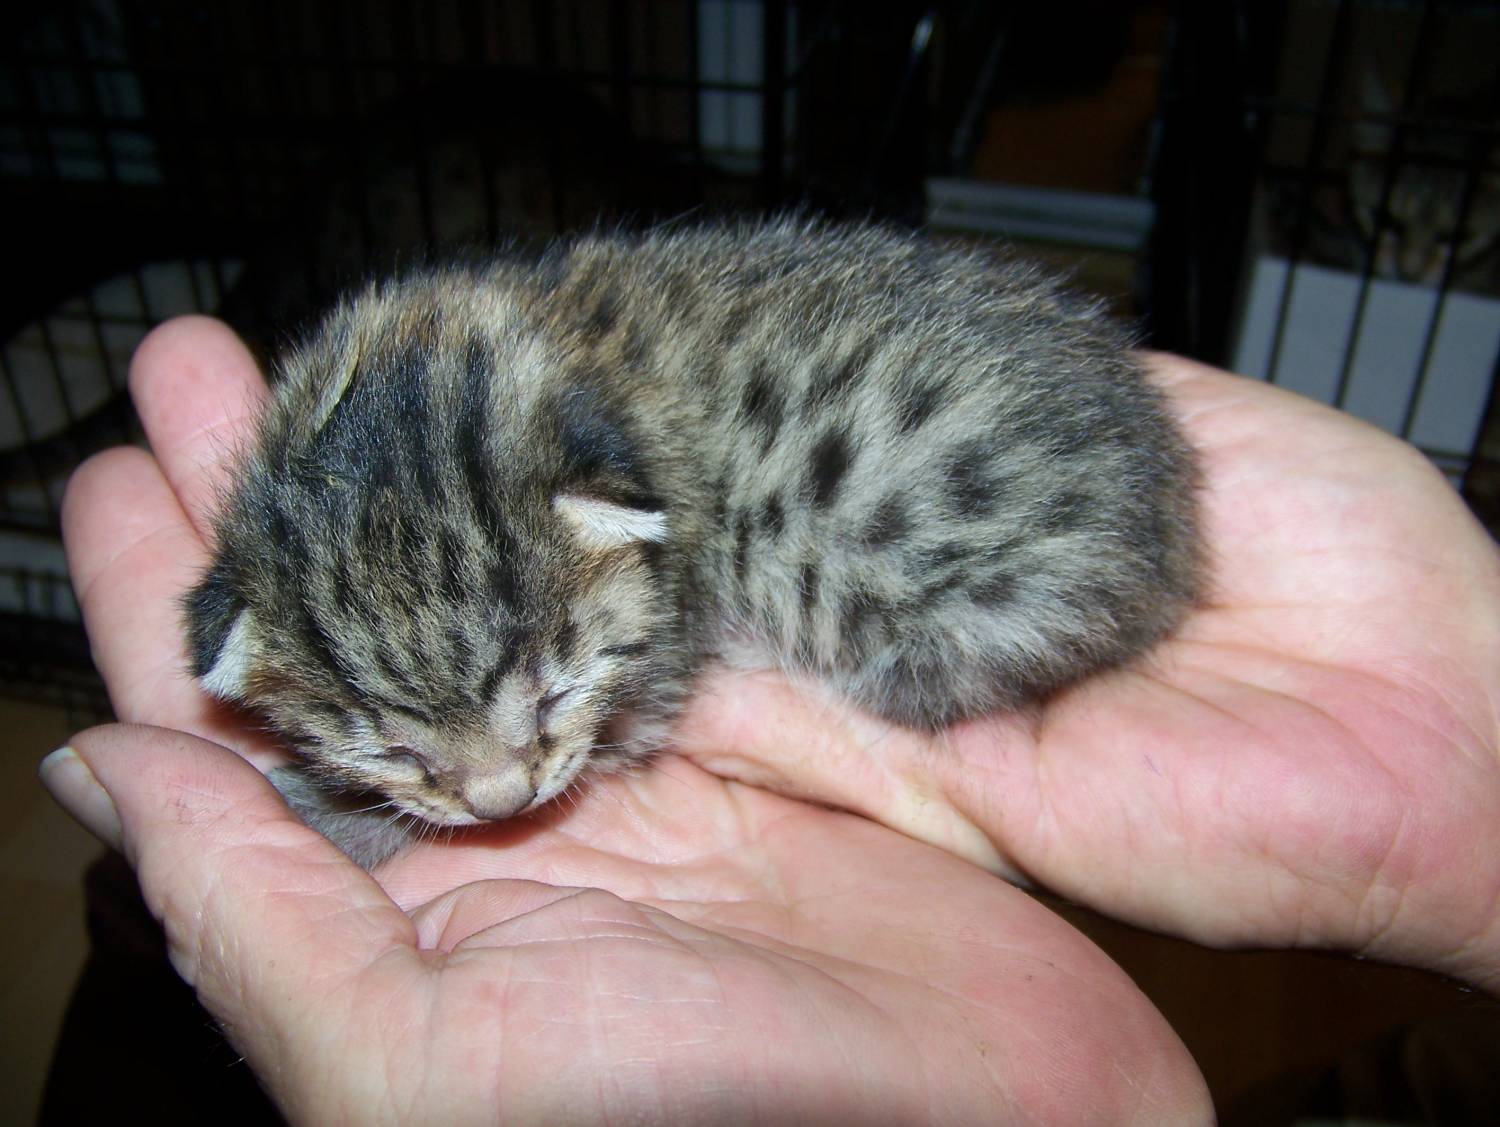 The little kitten of the Egyptian Mau on the palms